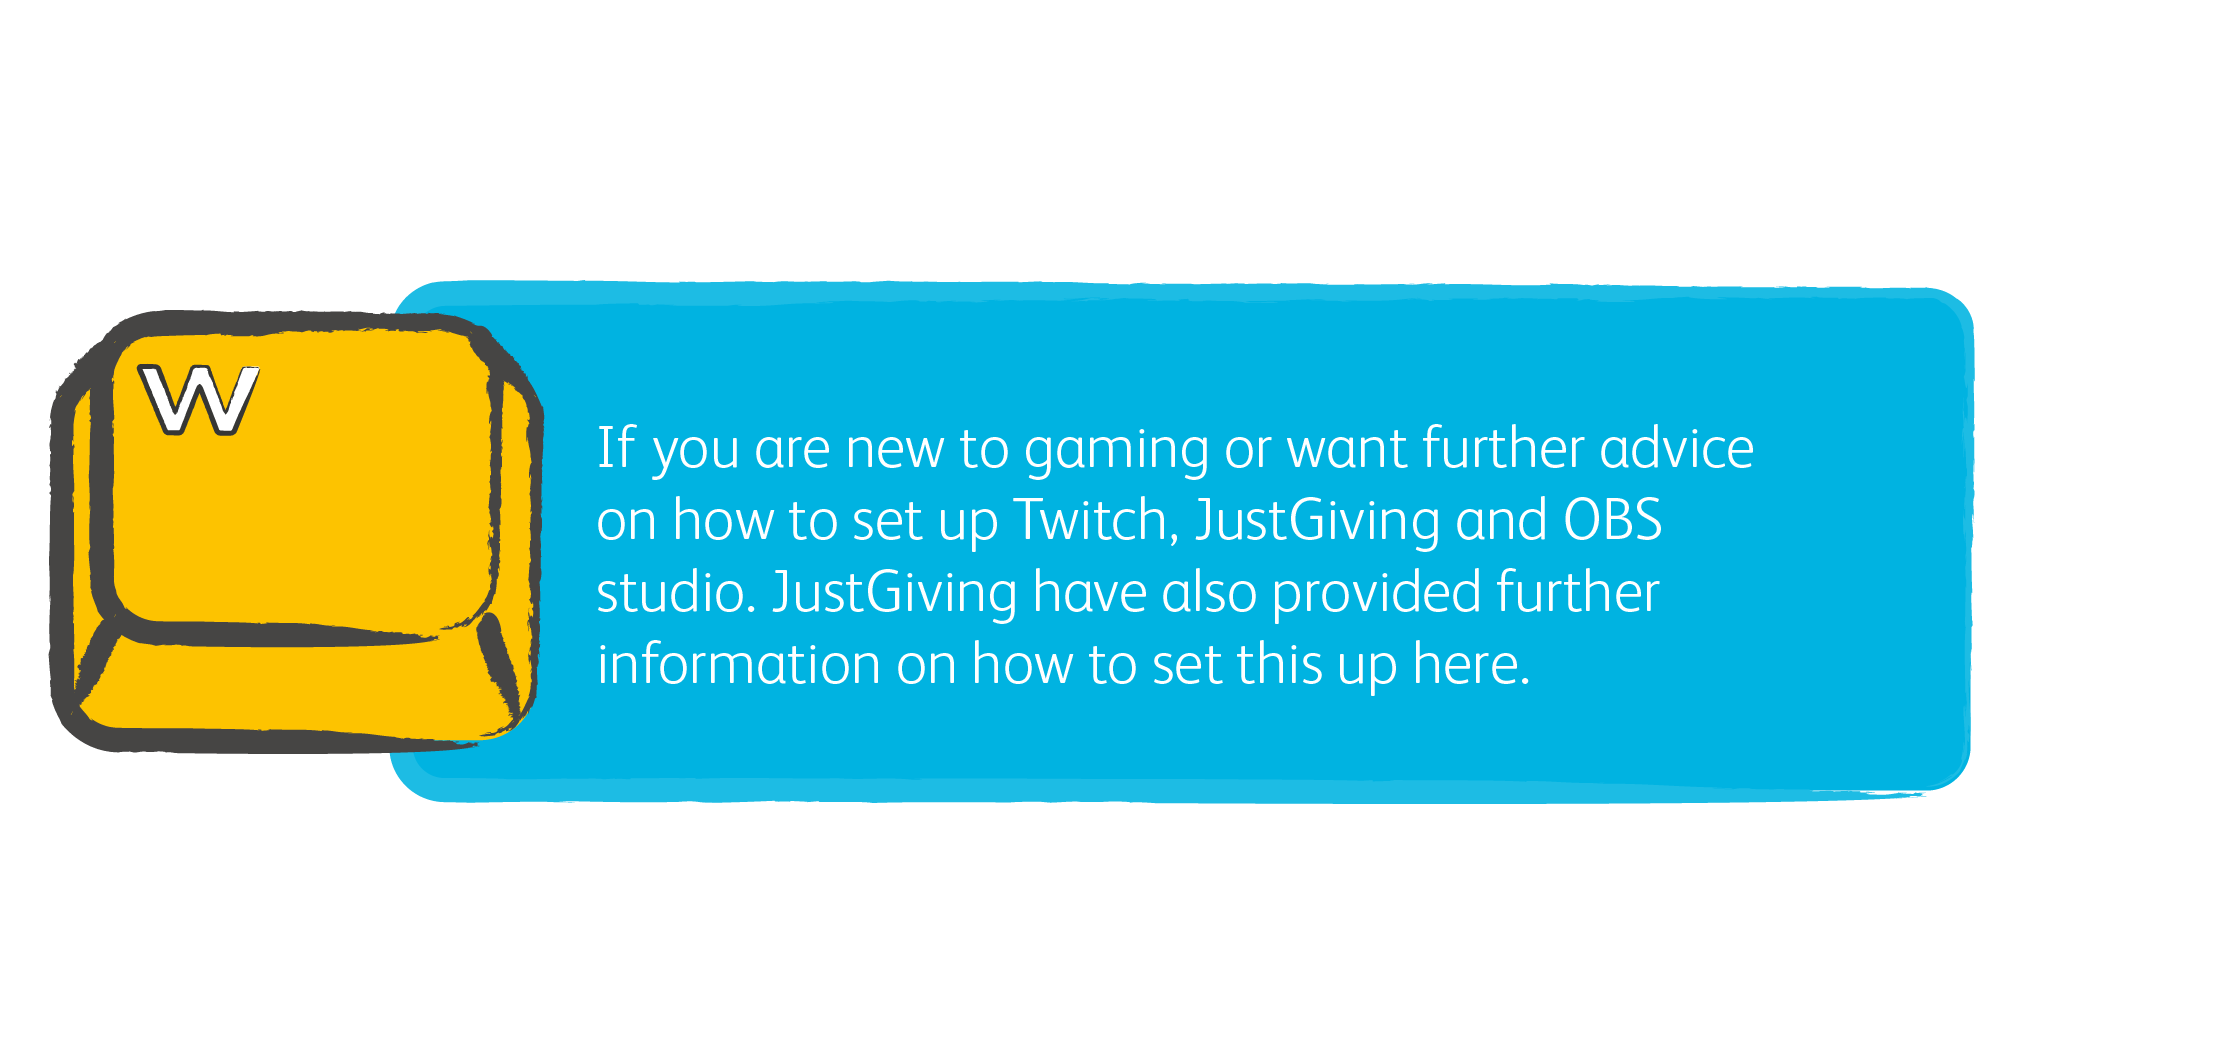 https://www.justgiving.com/fundraising/ideas/gaming/resources/how-to-stream-a-gaming-event